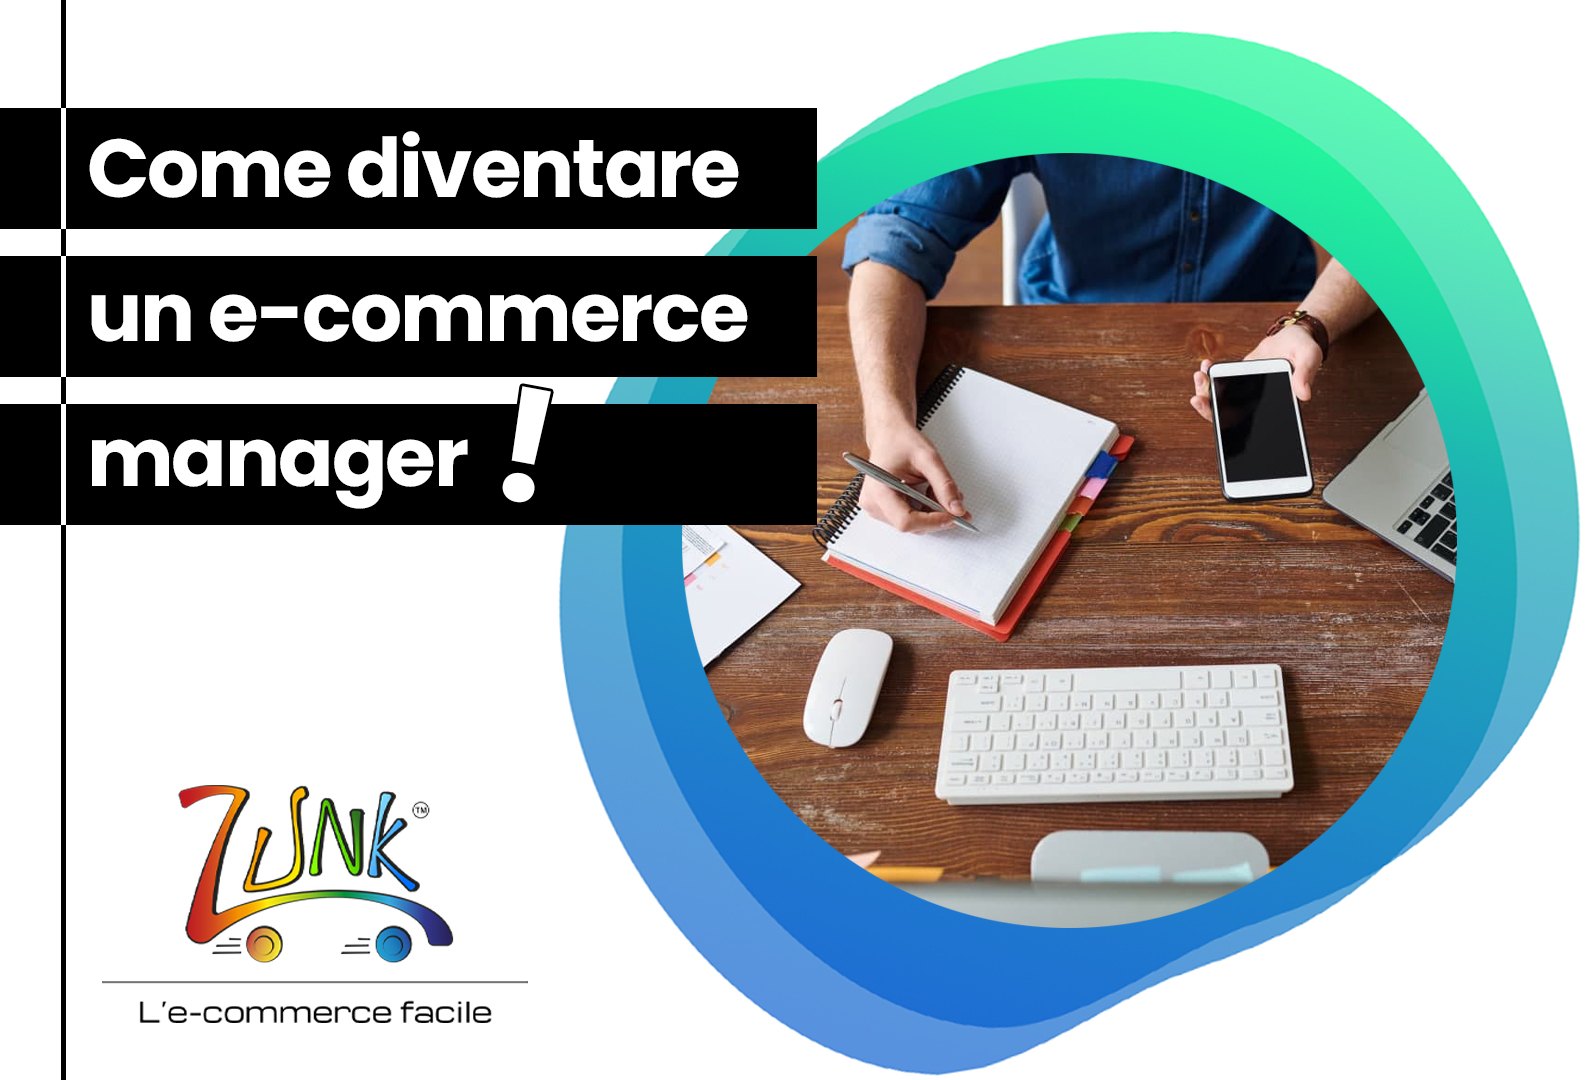 Come diventare ecommerce manager